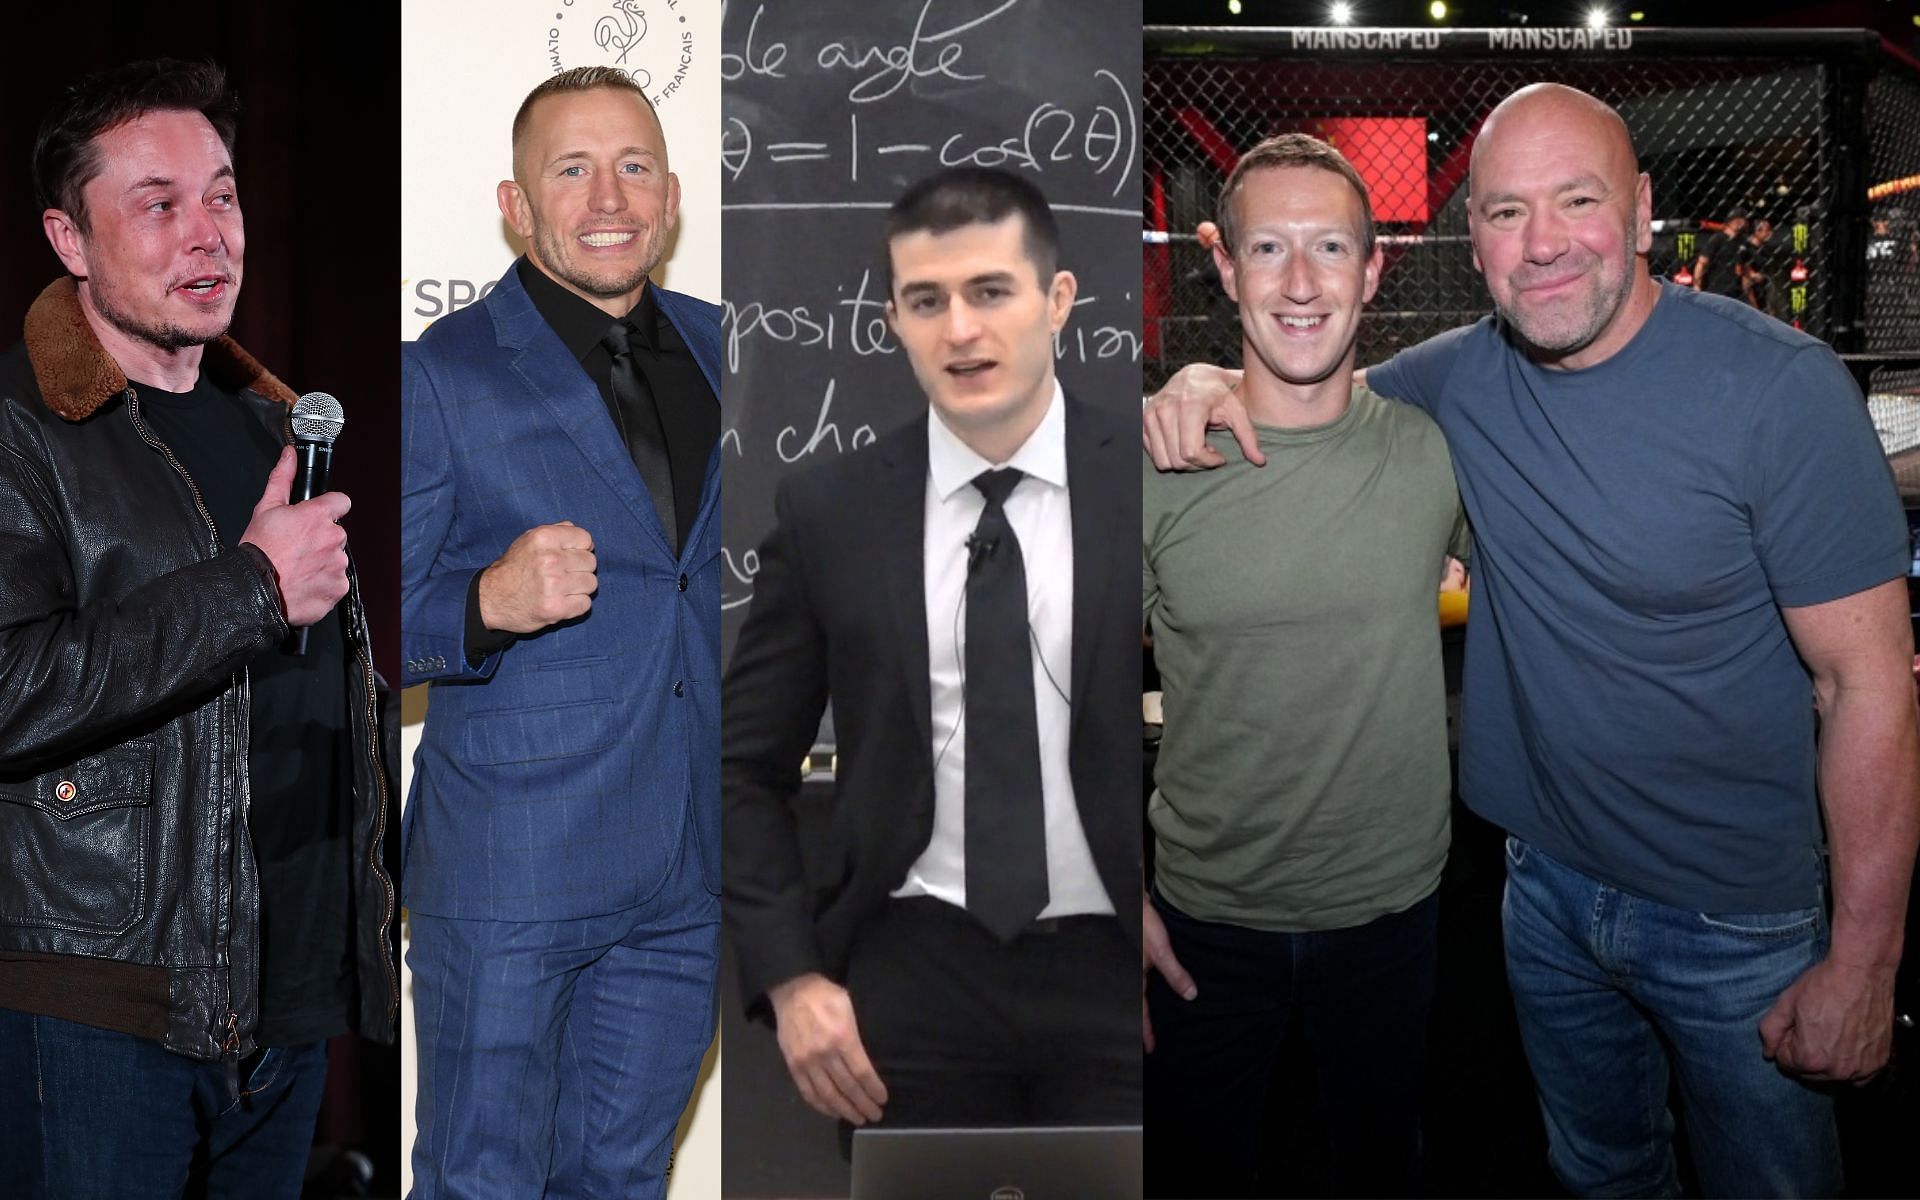 Elon Musk (far left), Georges St-Pierre (centre left), Lex Fridman (centre right), Mark Zuckerberg and Dana White (far right). [Images courtesy: centre right image from lexfridman.com and the rest from Getty Images]